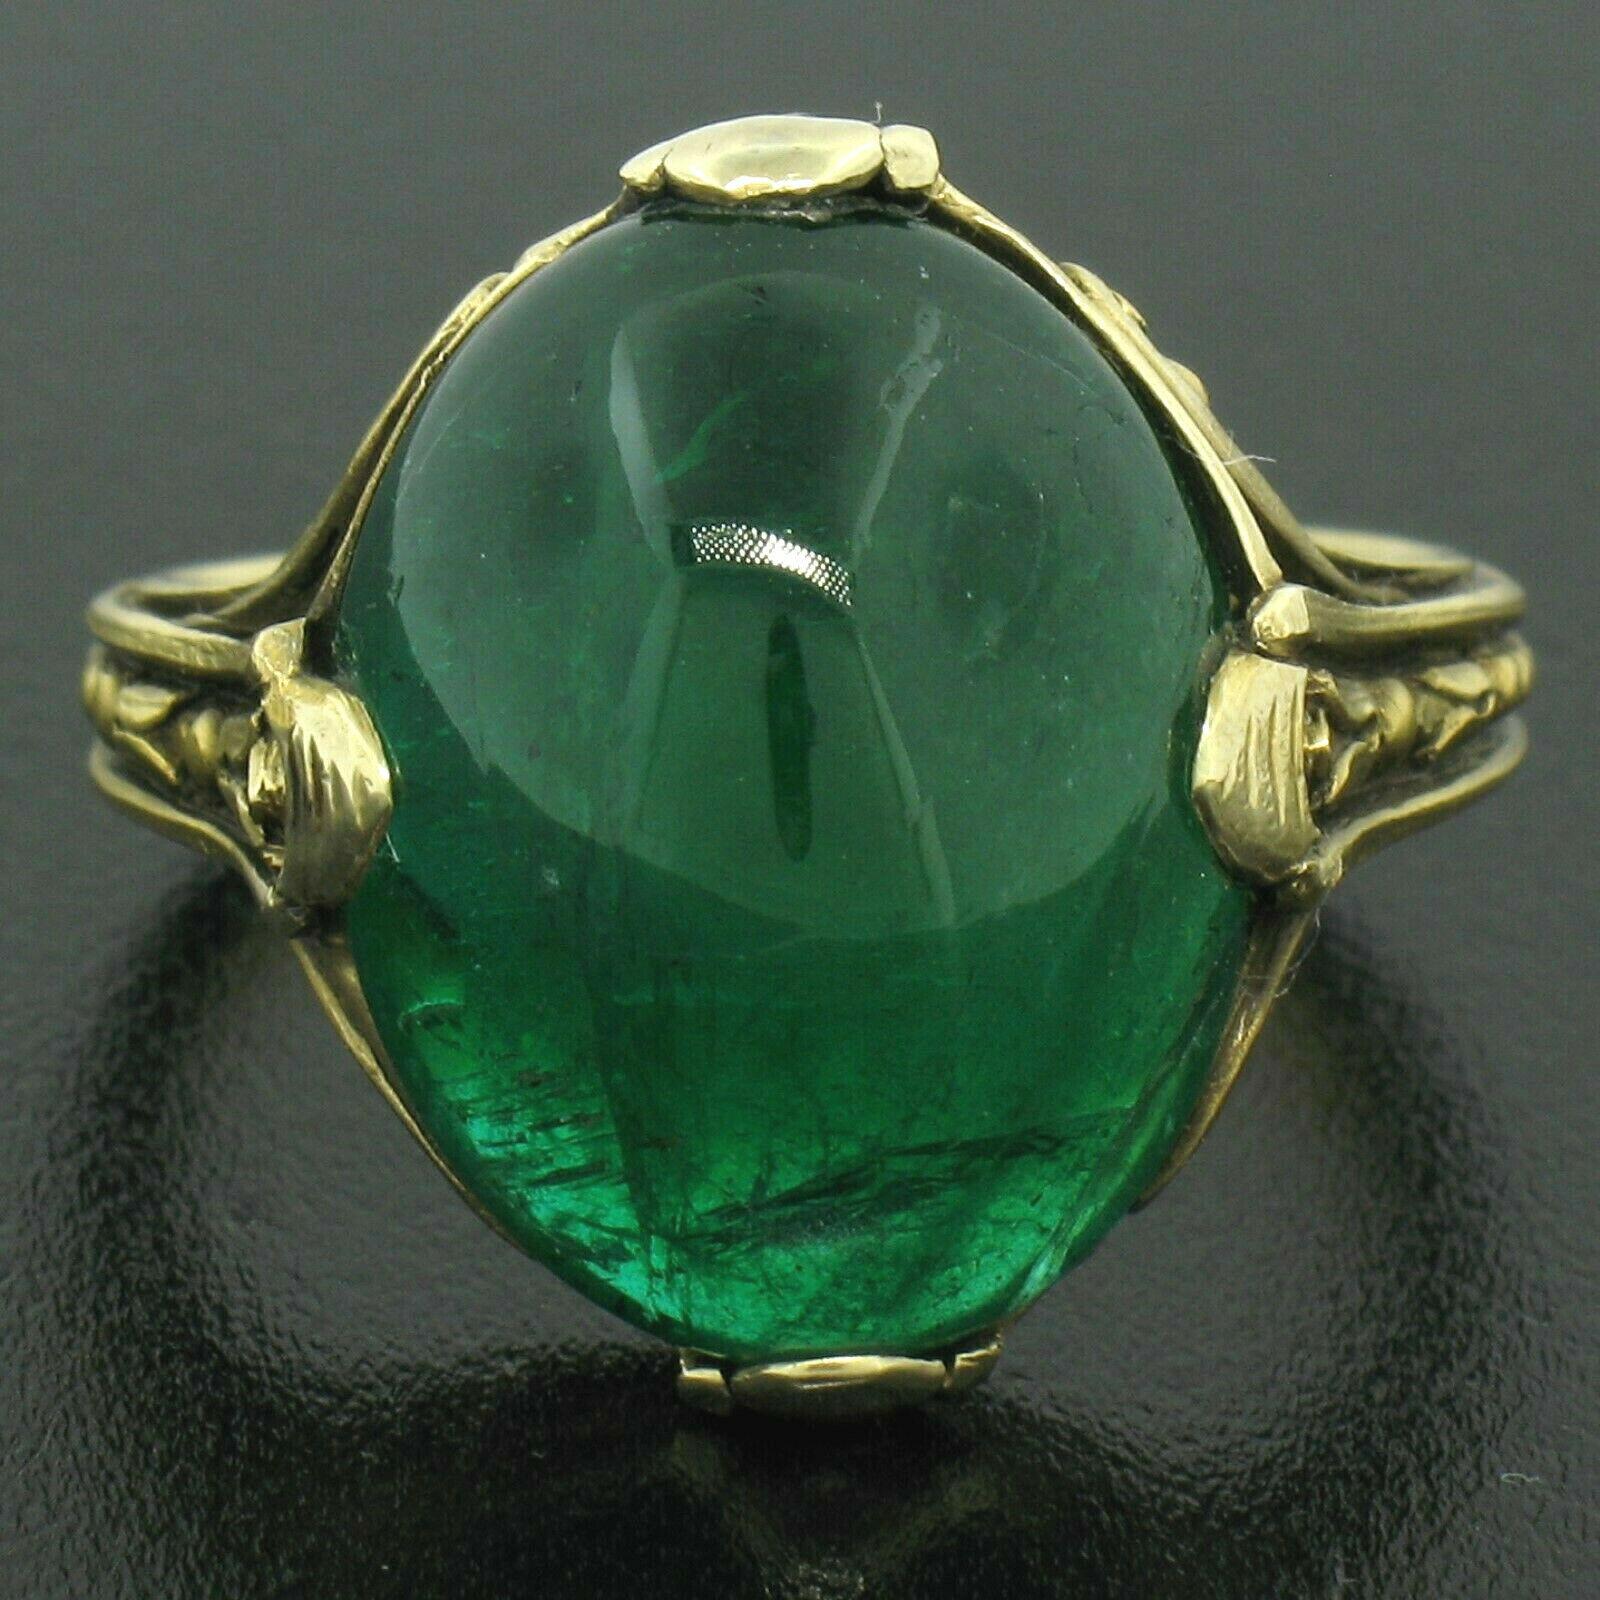 This truly unique, GIA certified, antique emerald solitaire ring was crafted in solid 14k yellow gold and features a breathtaking natural emerald with a deep and super rich green color. The stone is perfectly prong set in a beautifully hand etched